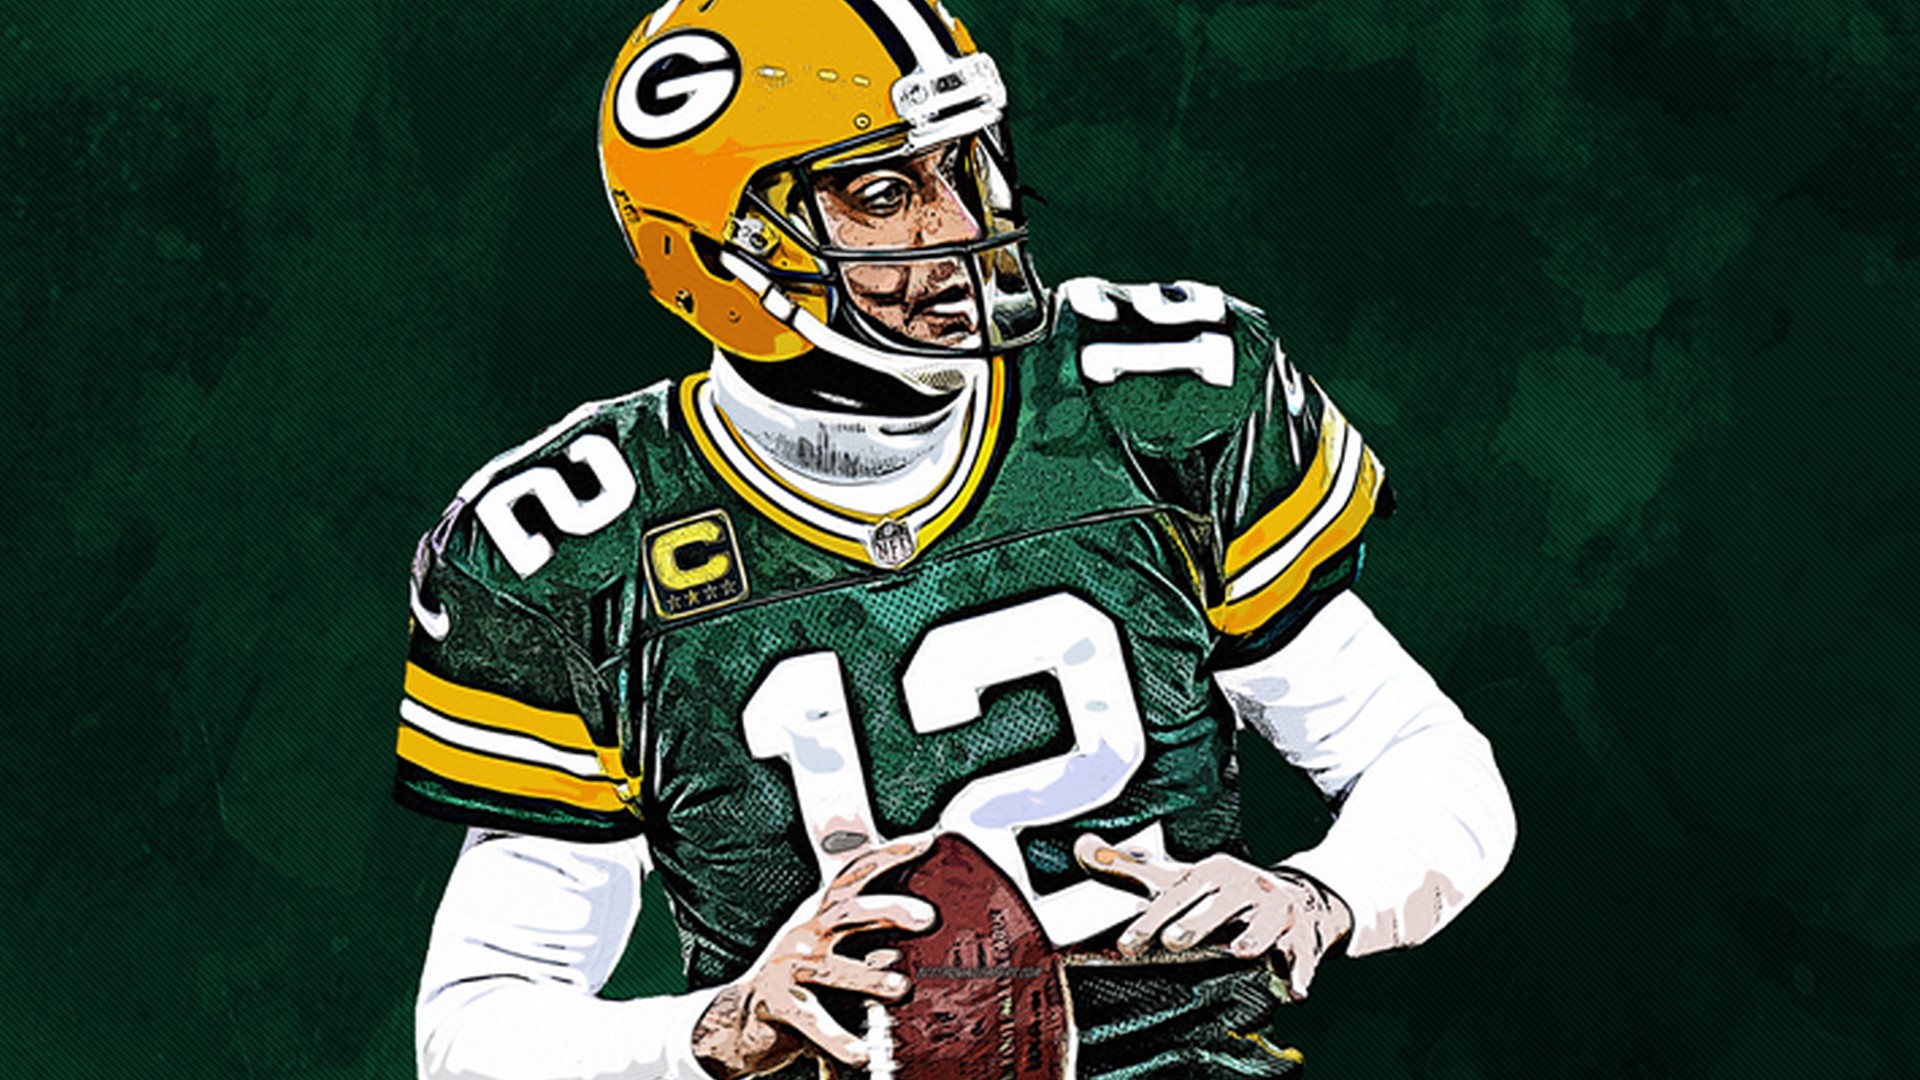 Aaron Rodgers Backgrounds Hd With High-resolution Pixel - Sprint Football - HD Wallpaper 